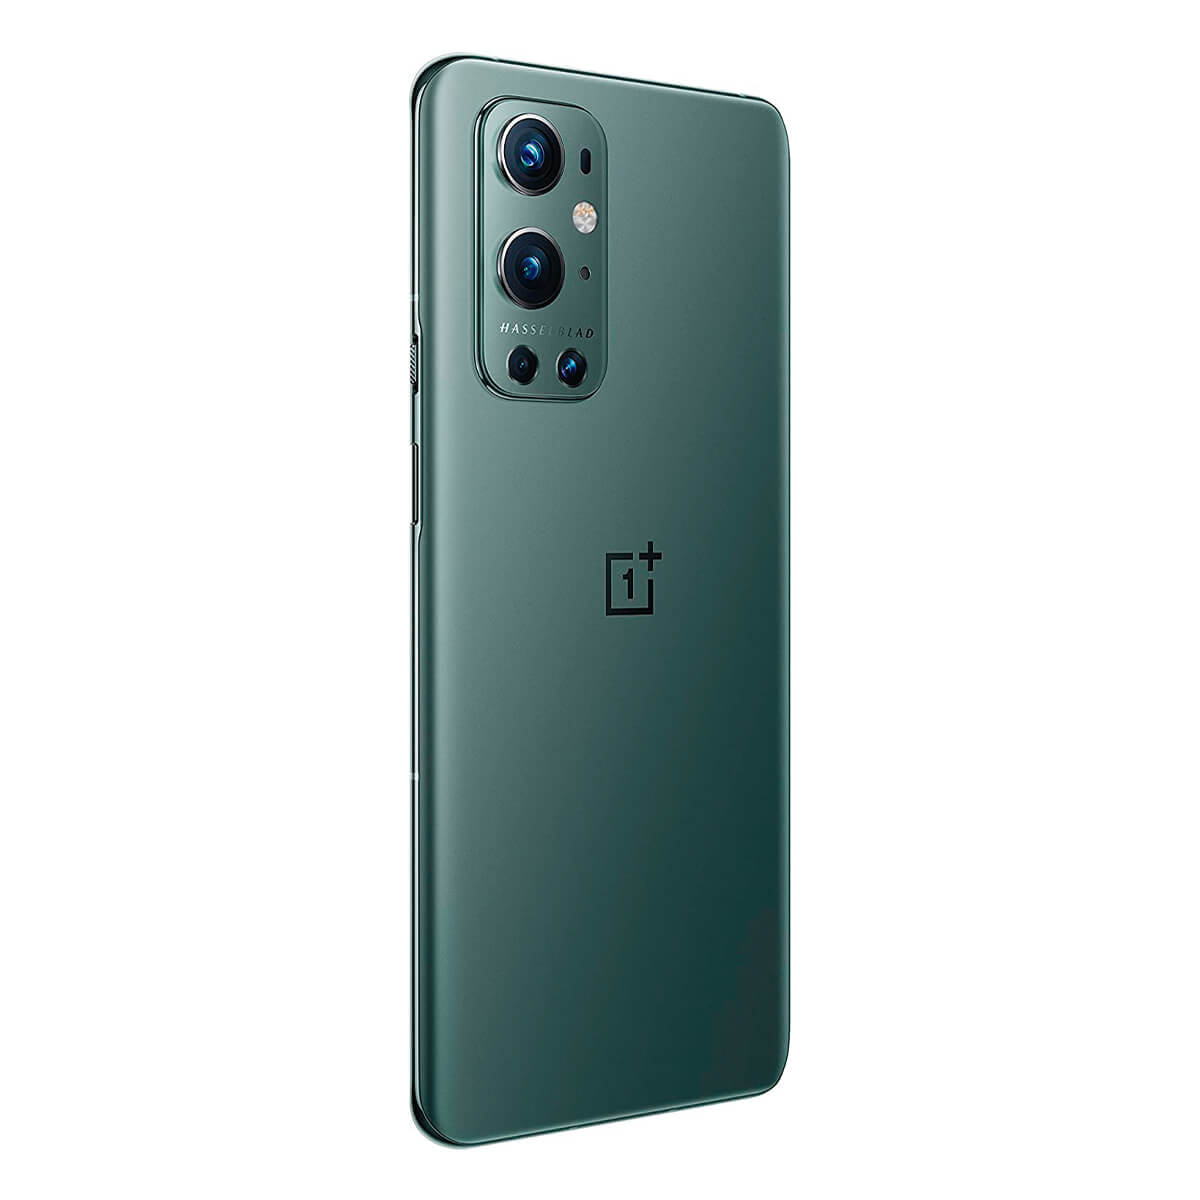 ONEPLUS 9 PRO 5G 12GB/256GB VERDE (FOREST GREEN) DUAL SIM | Móviles libres